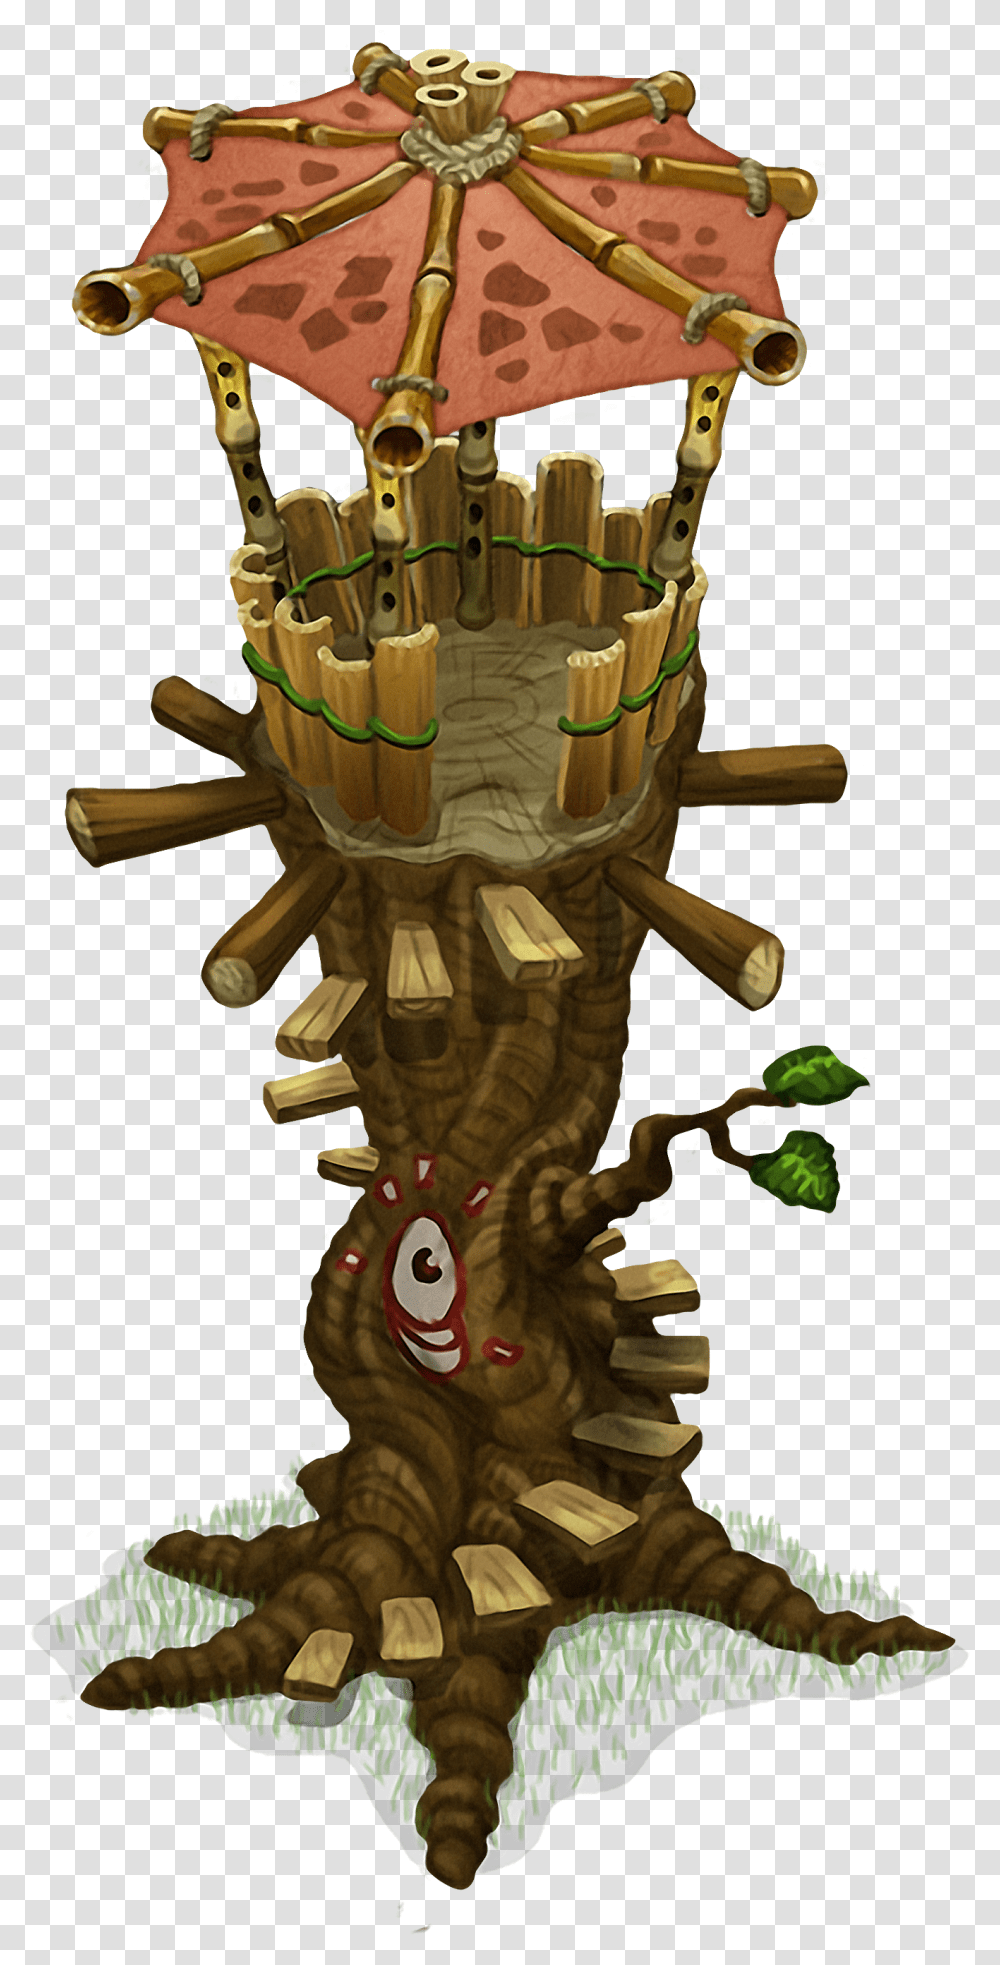 Tree Forte Tower My Singing Monsters Wiki Fandom My Singing Monsters Decorations, Toy, Architecture, Building, Symbol Transparent Png